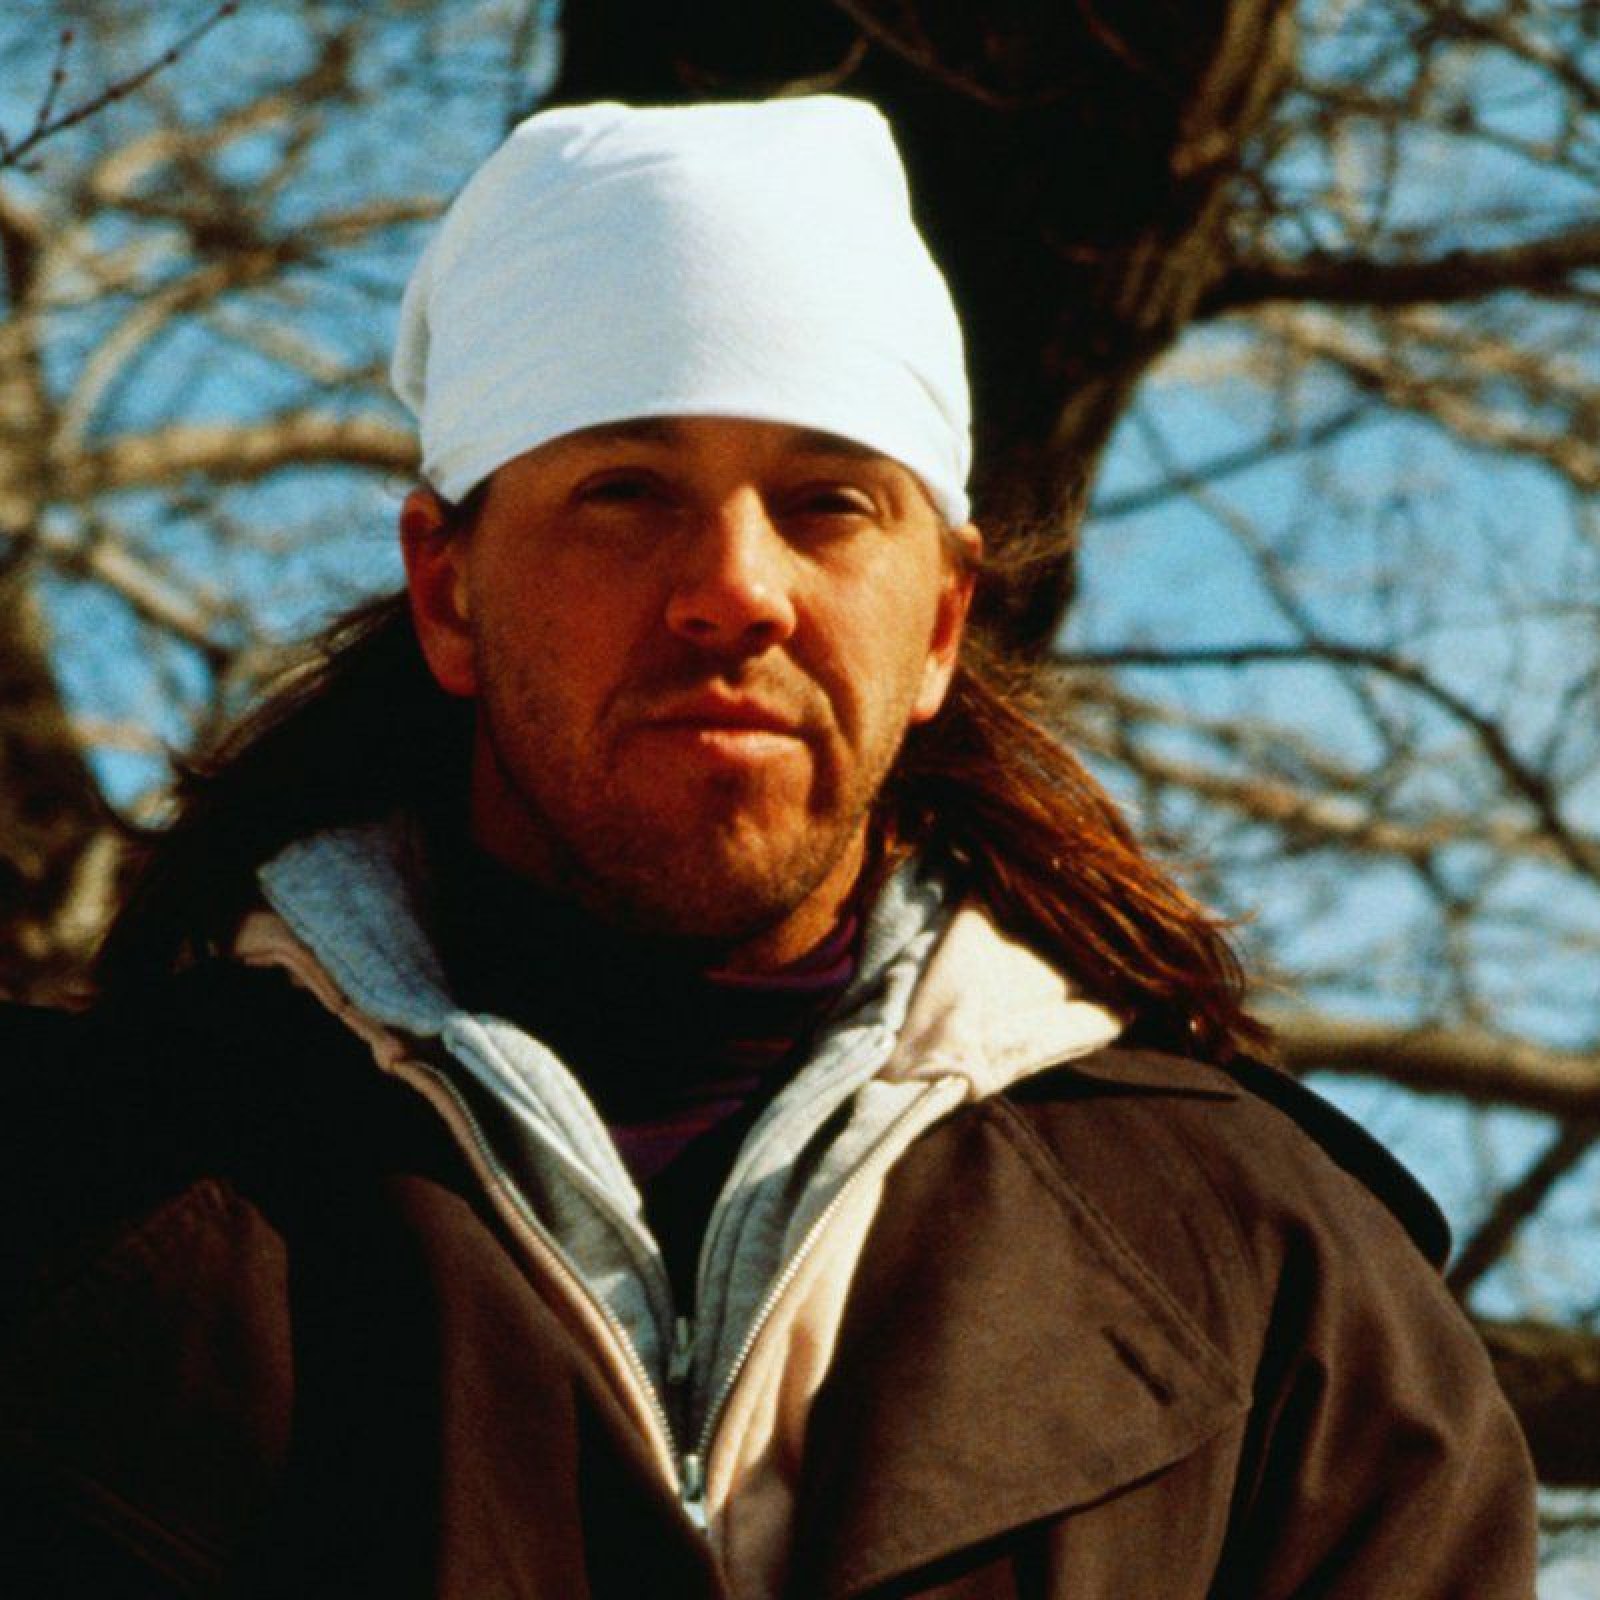 David Foster Wallace's Personal Files